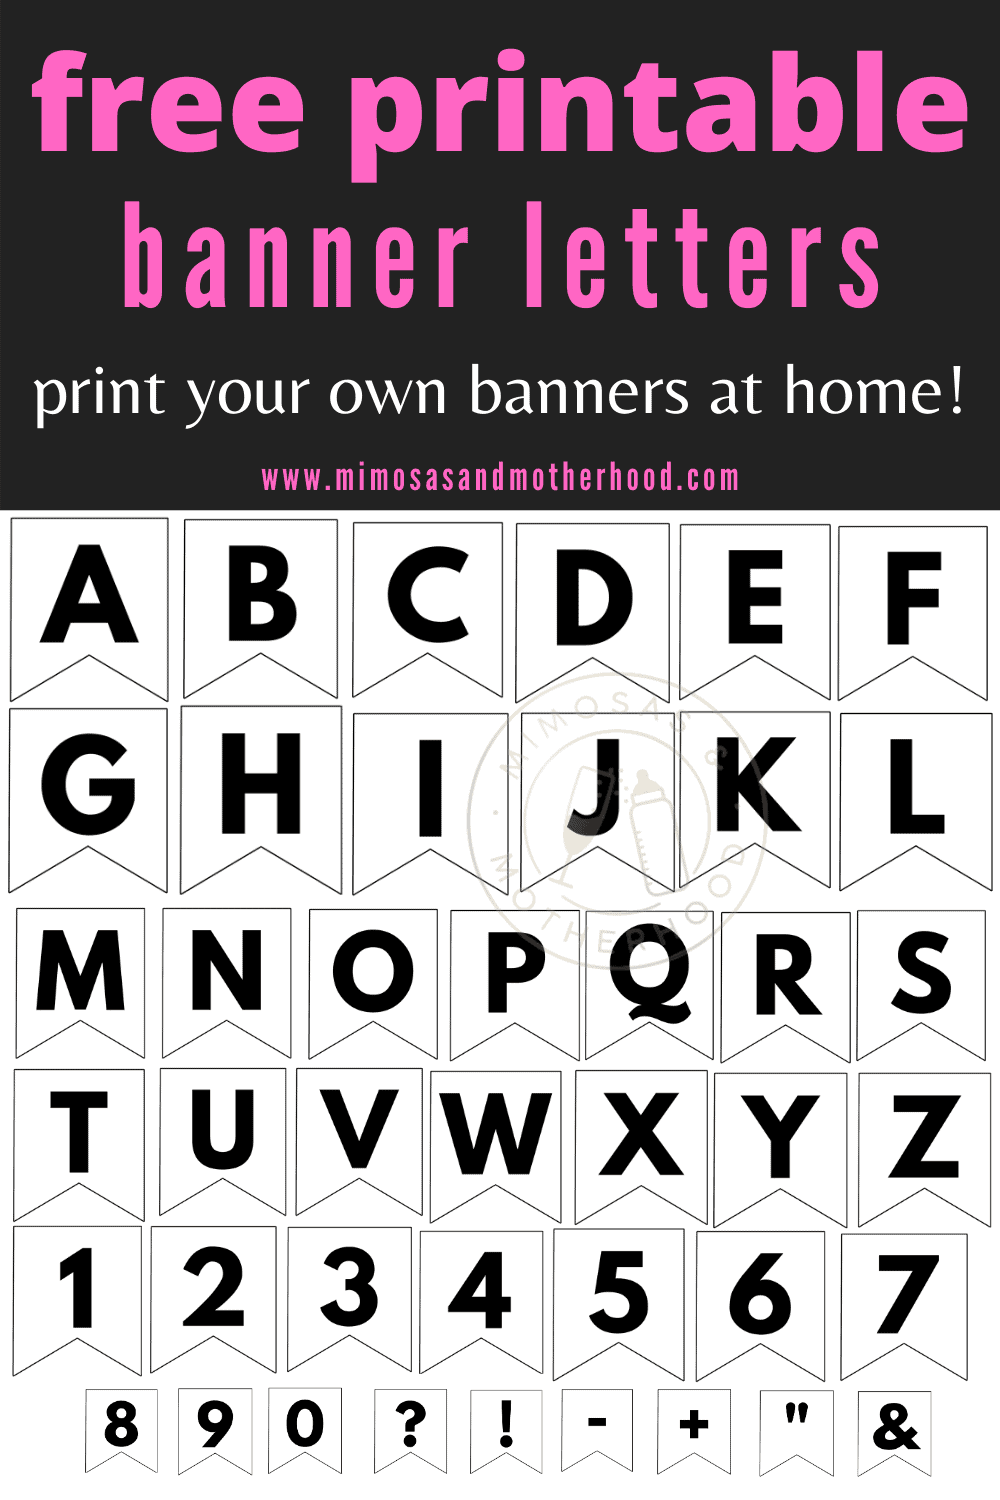 Free Printable ABC Banner Letters Template - Mimosas & Motherhood For Free Letter Templates For Banners